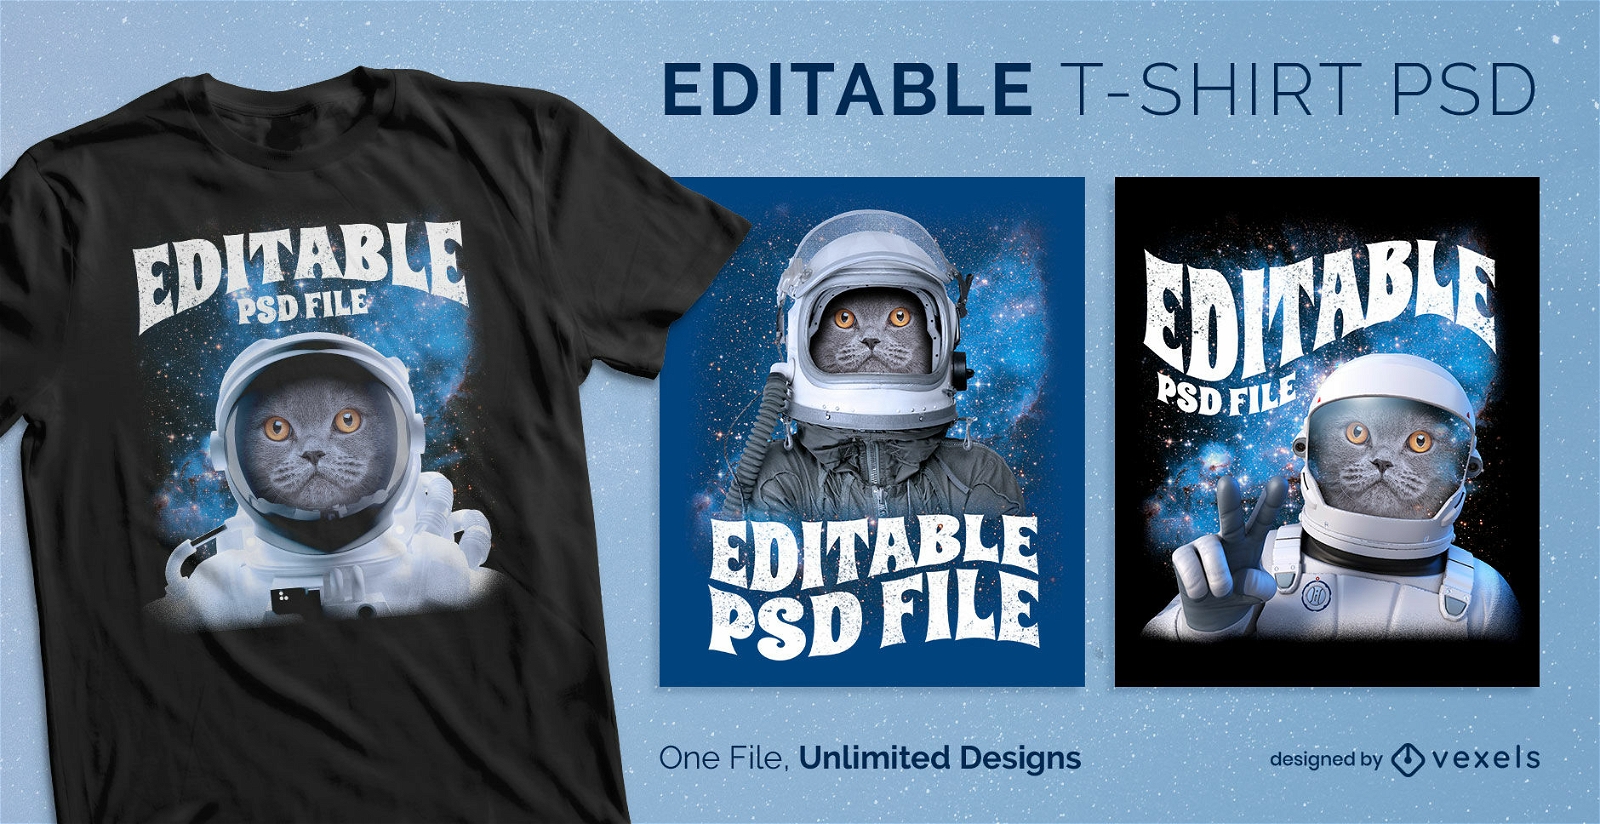 Astronaut cat in space scalable t-shirt psd